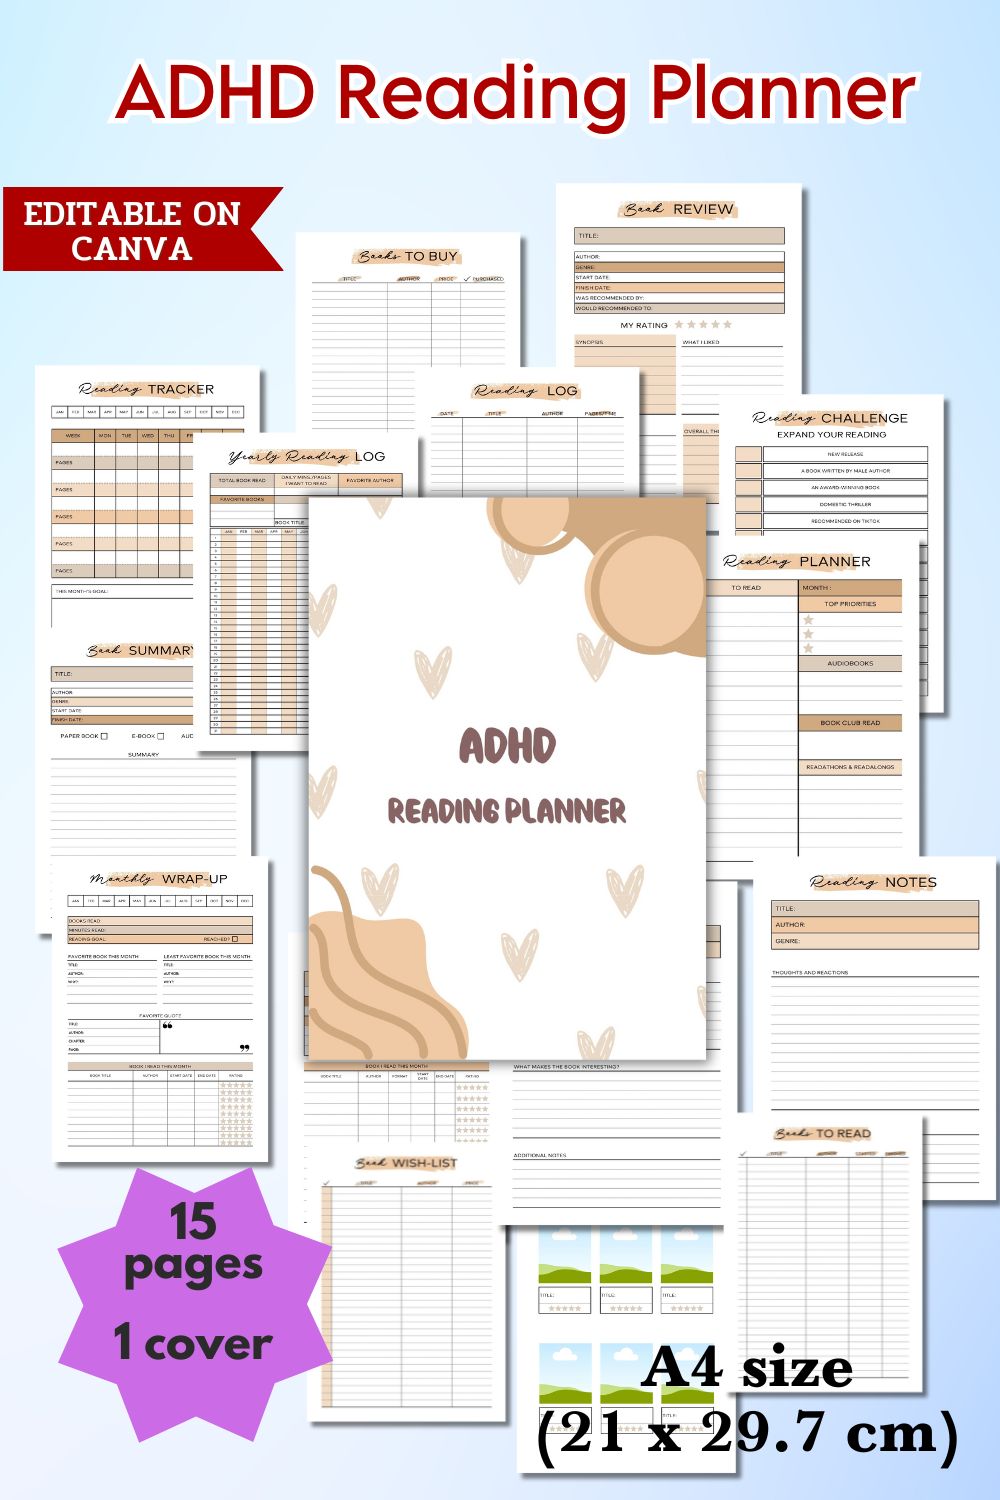 ADHD Reading Planner - Canva Template pinterest preview image.